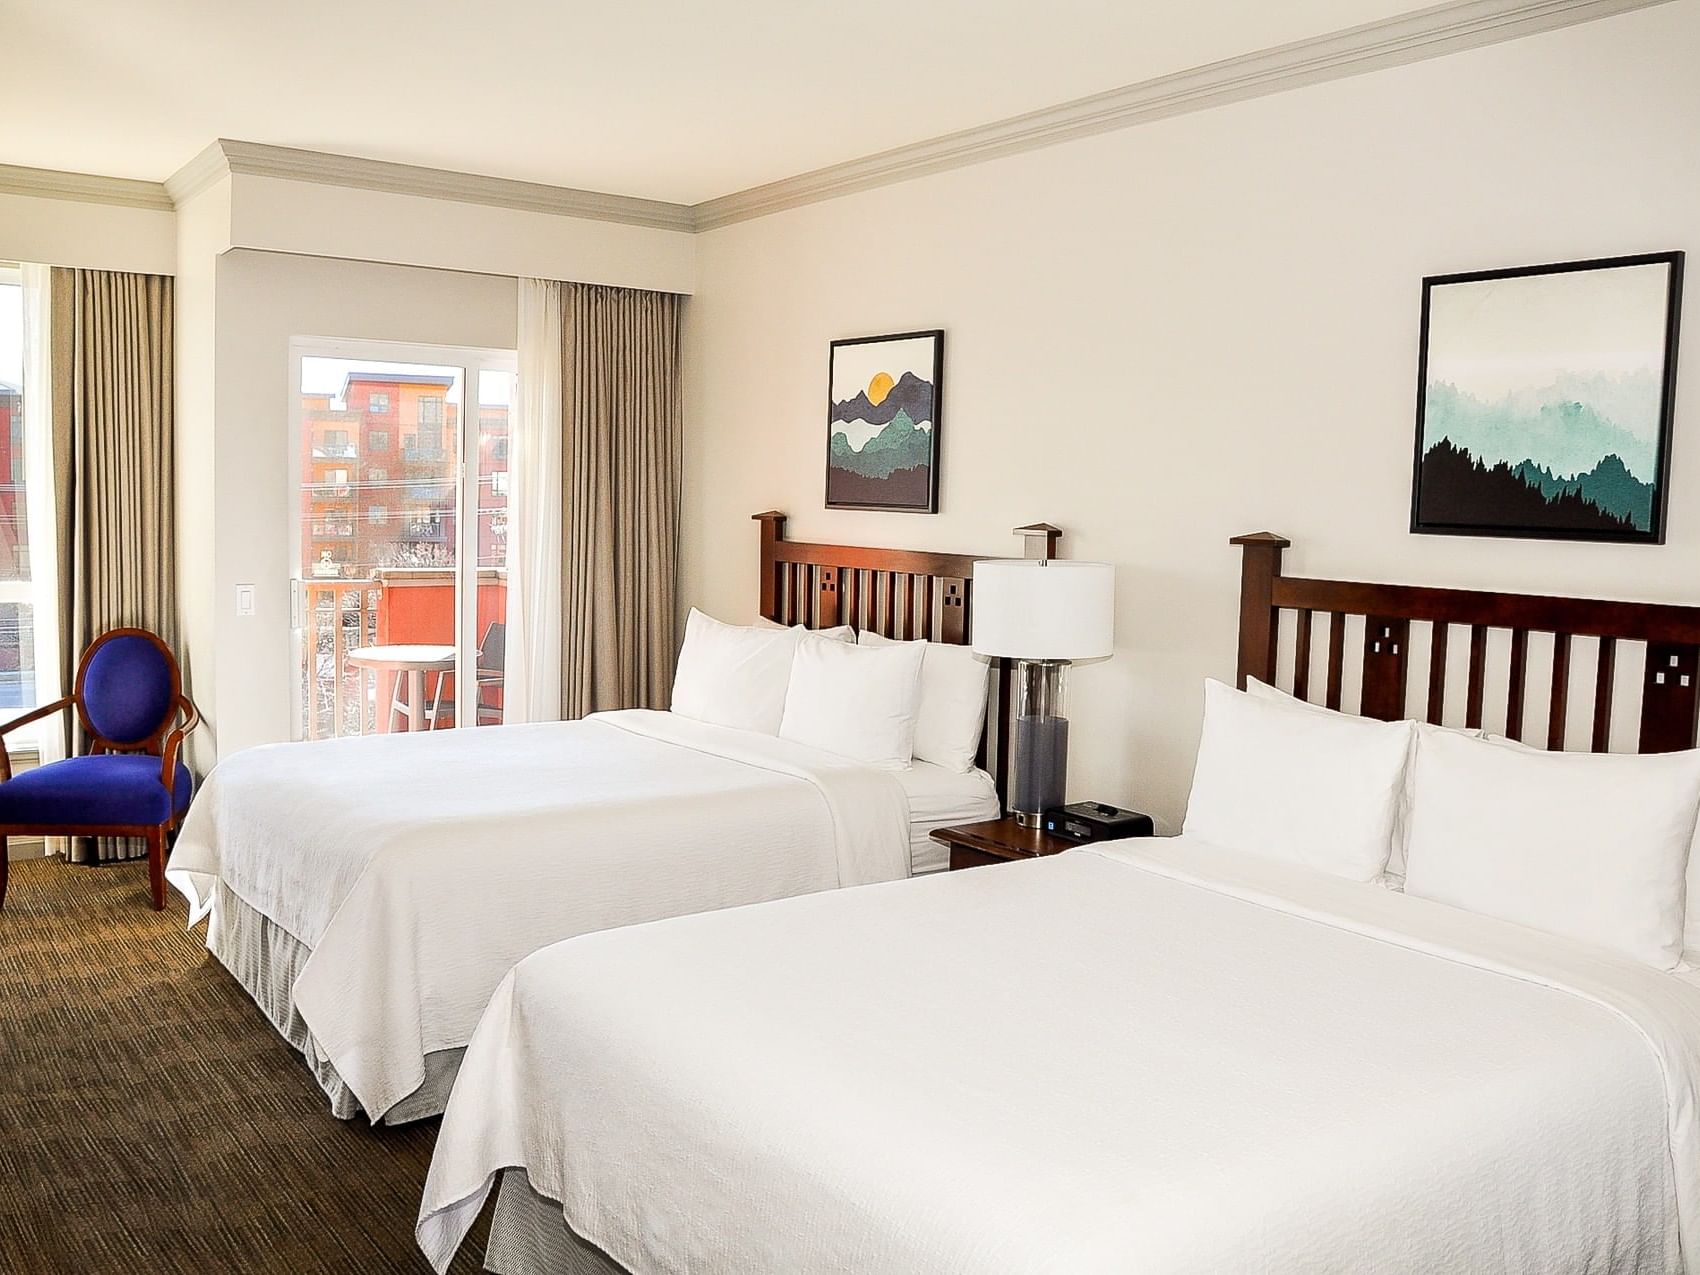 Deluxe Guest Room with two beds at Manteo Resort Waterfront